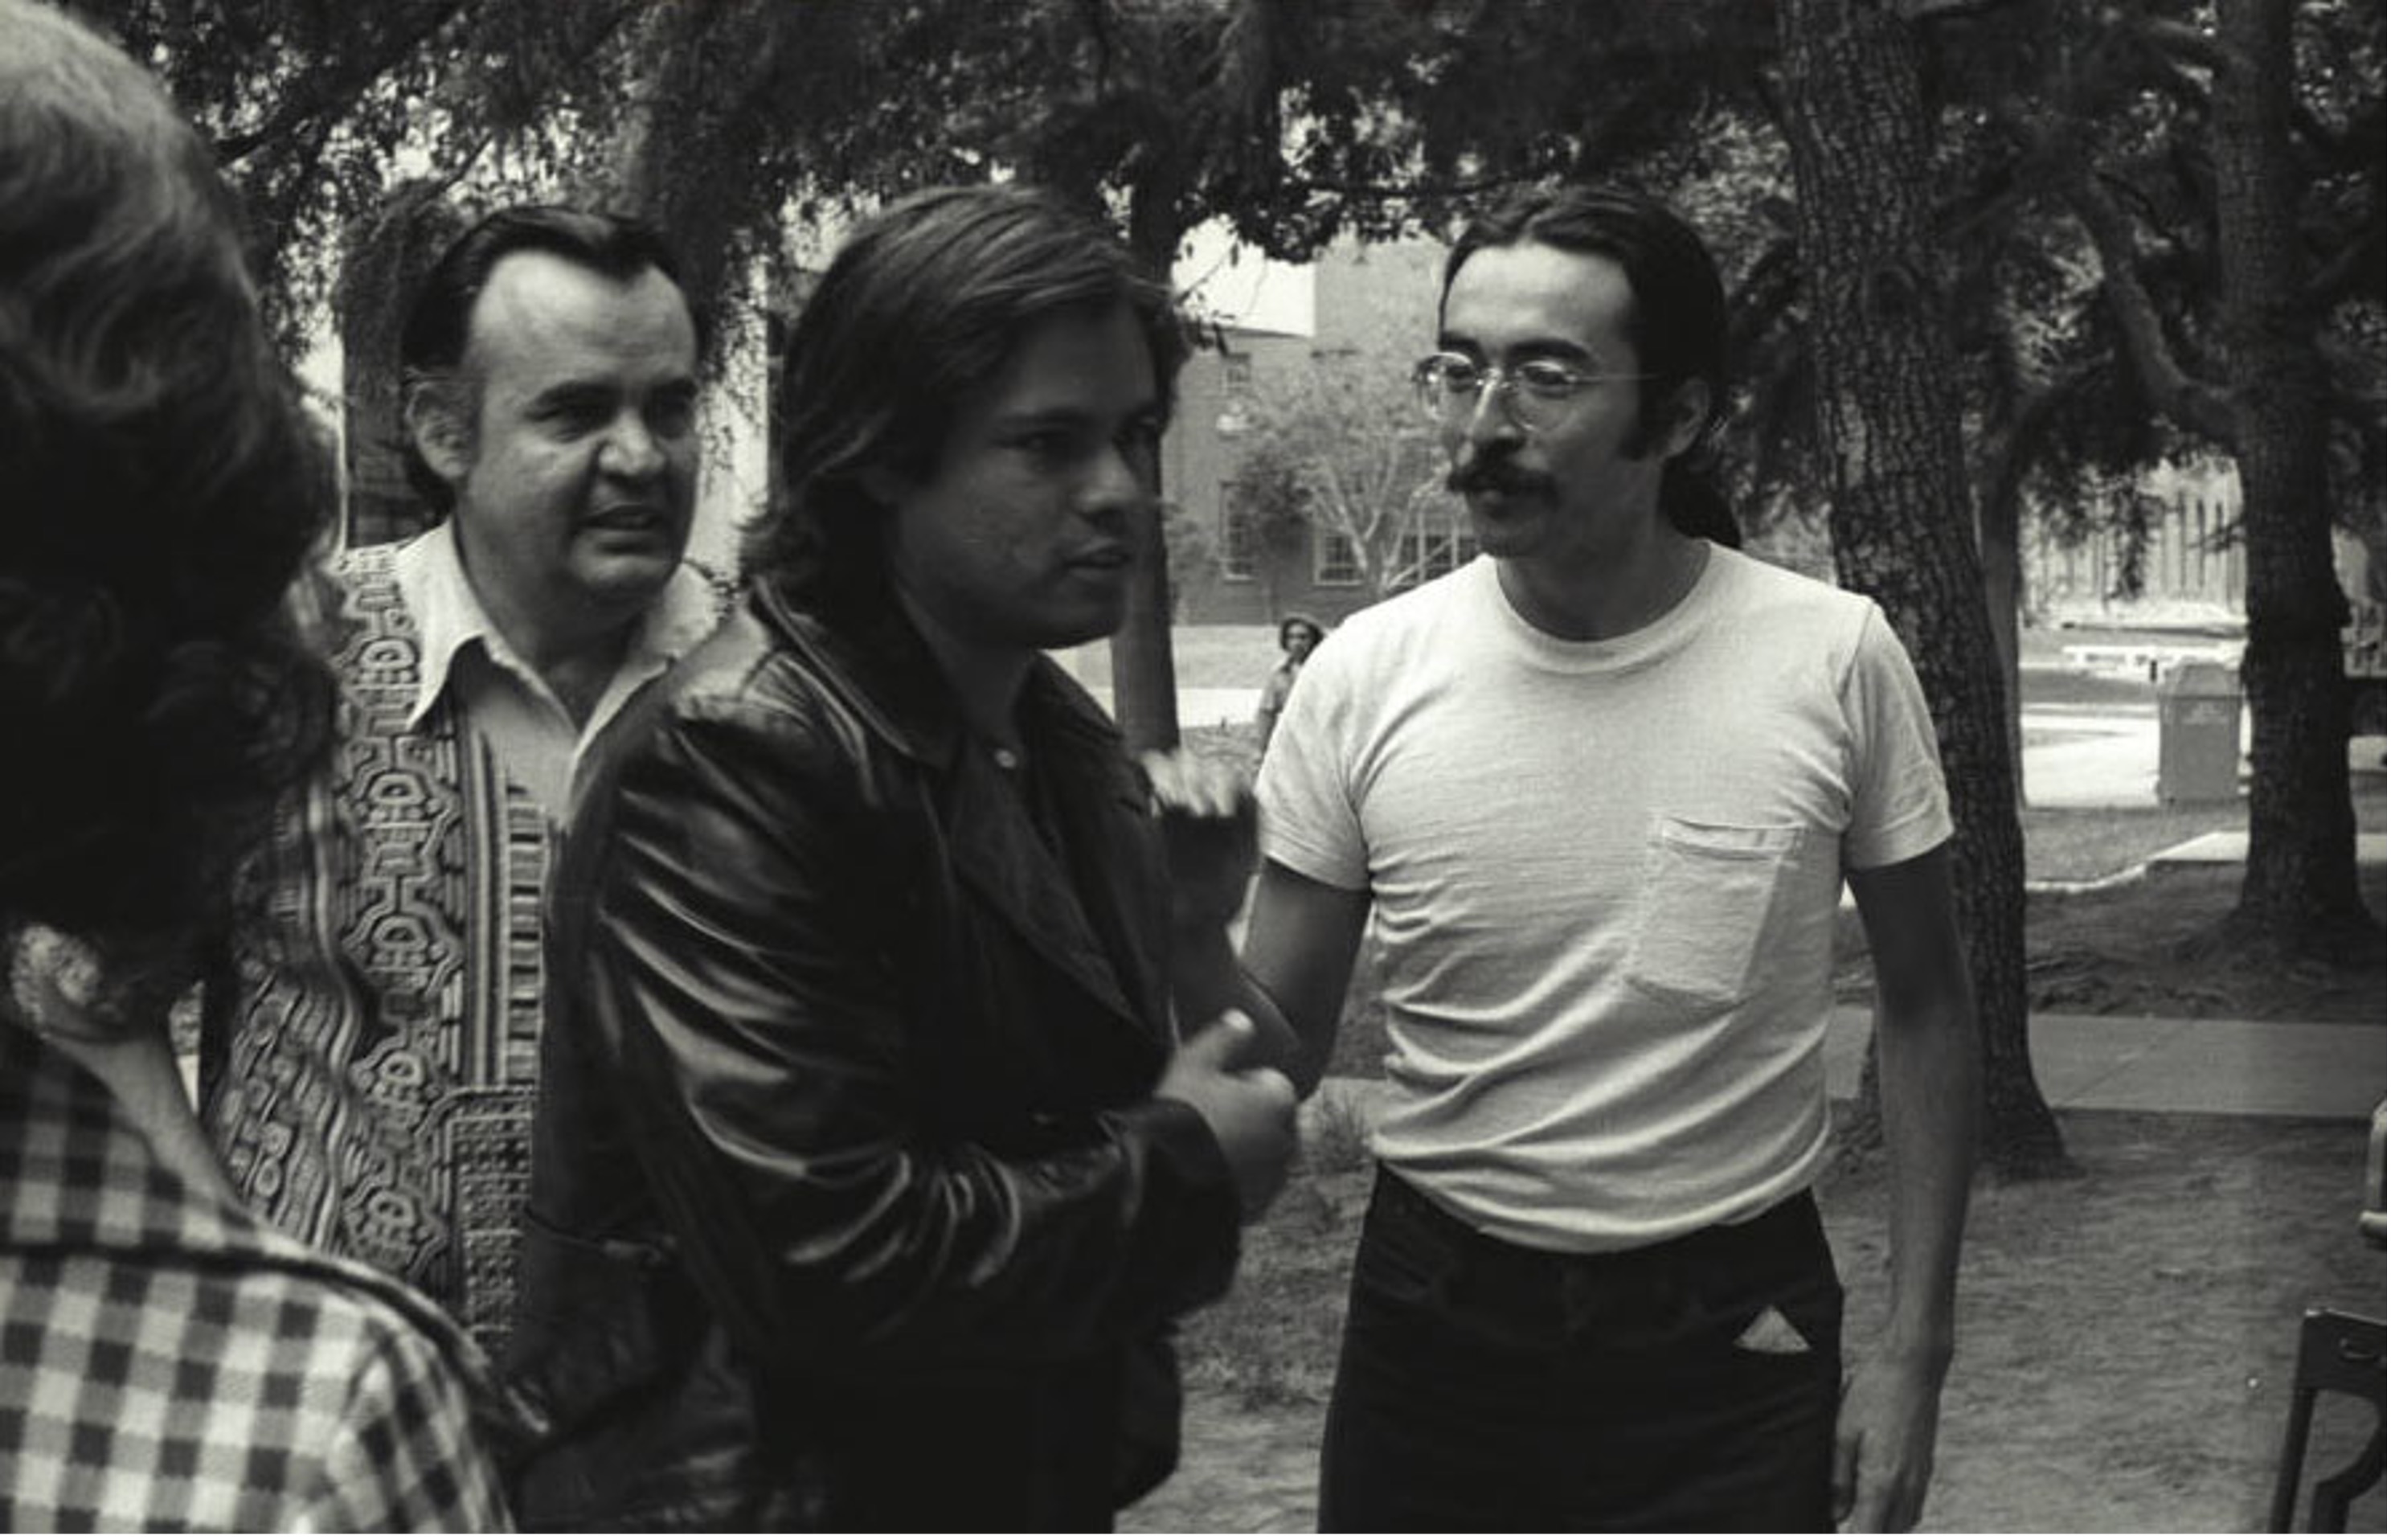 Juan Felipe Herrera (On the right with a white t-shirt) in the years 1979-1983 when he was writing the book Exiles of Desire (1983)